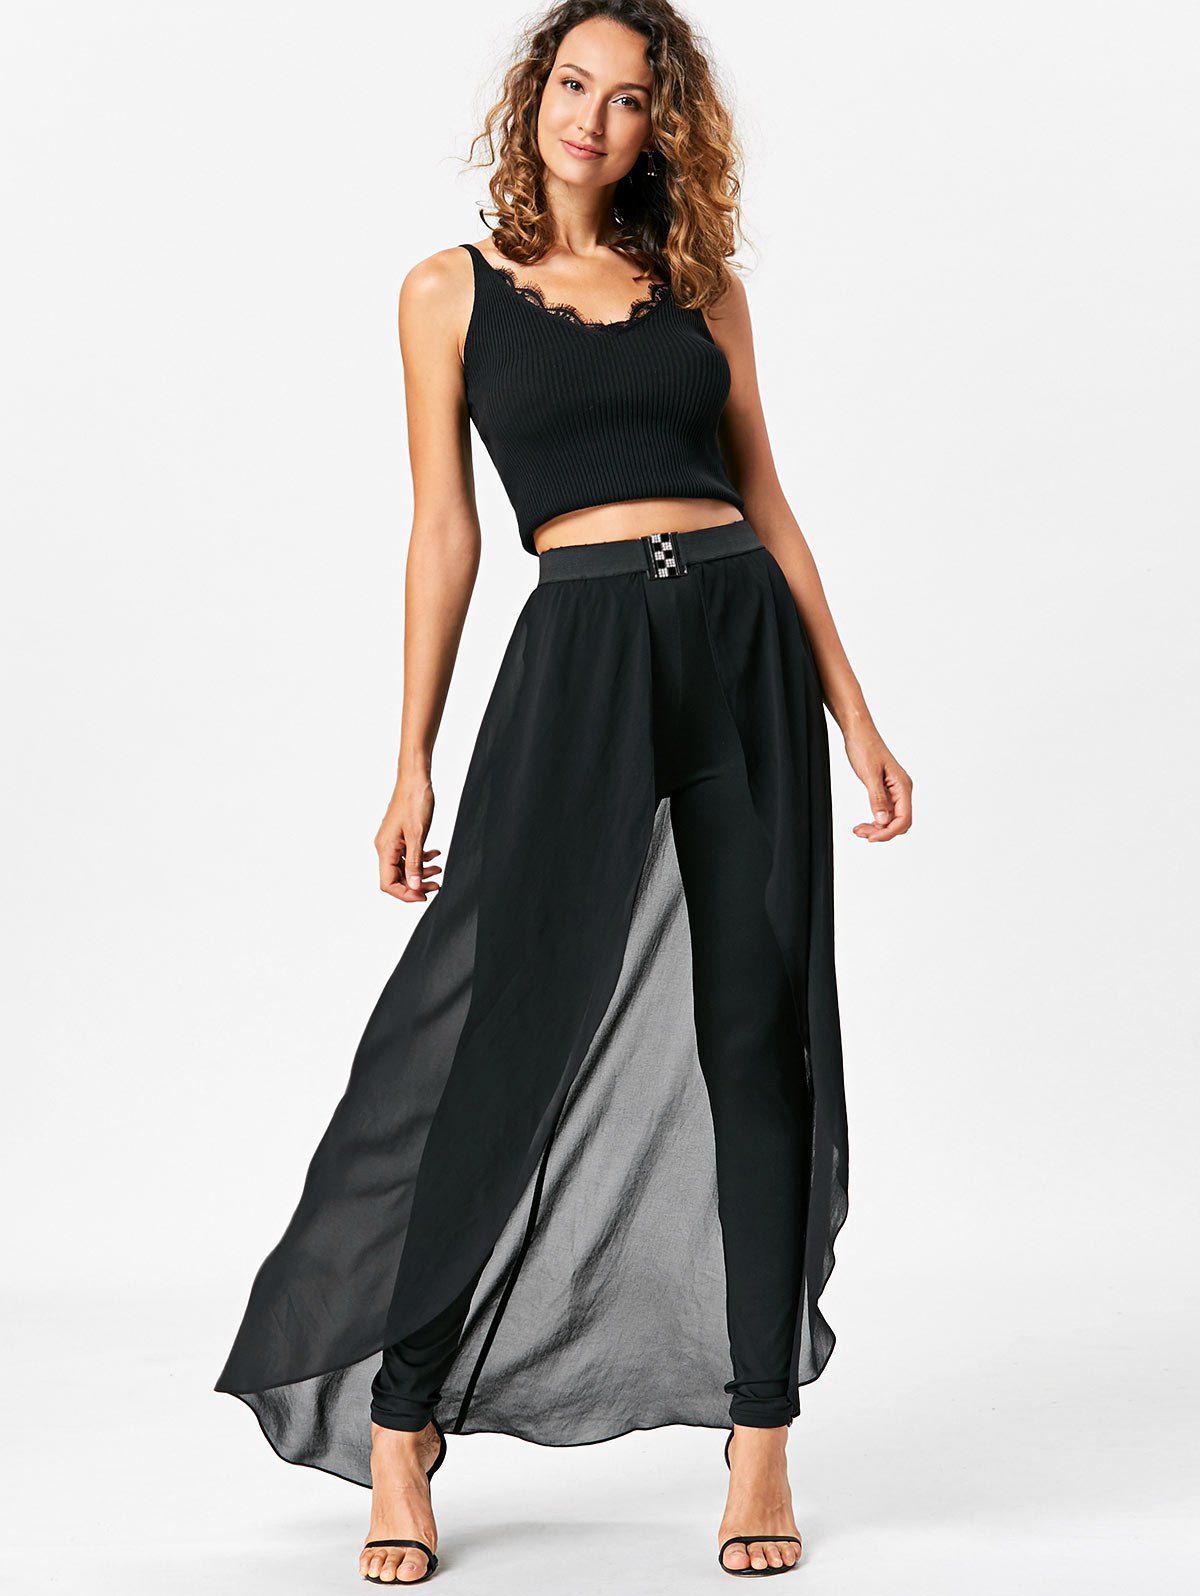 DressLily.com: Photo Gallery - High Waist Slimming Pants with Skirt